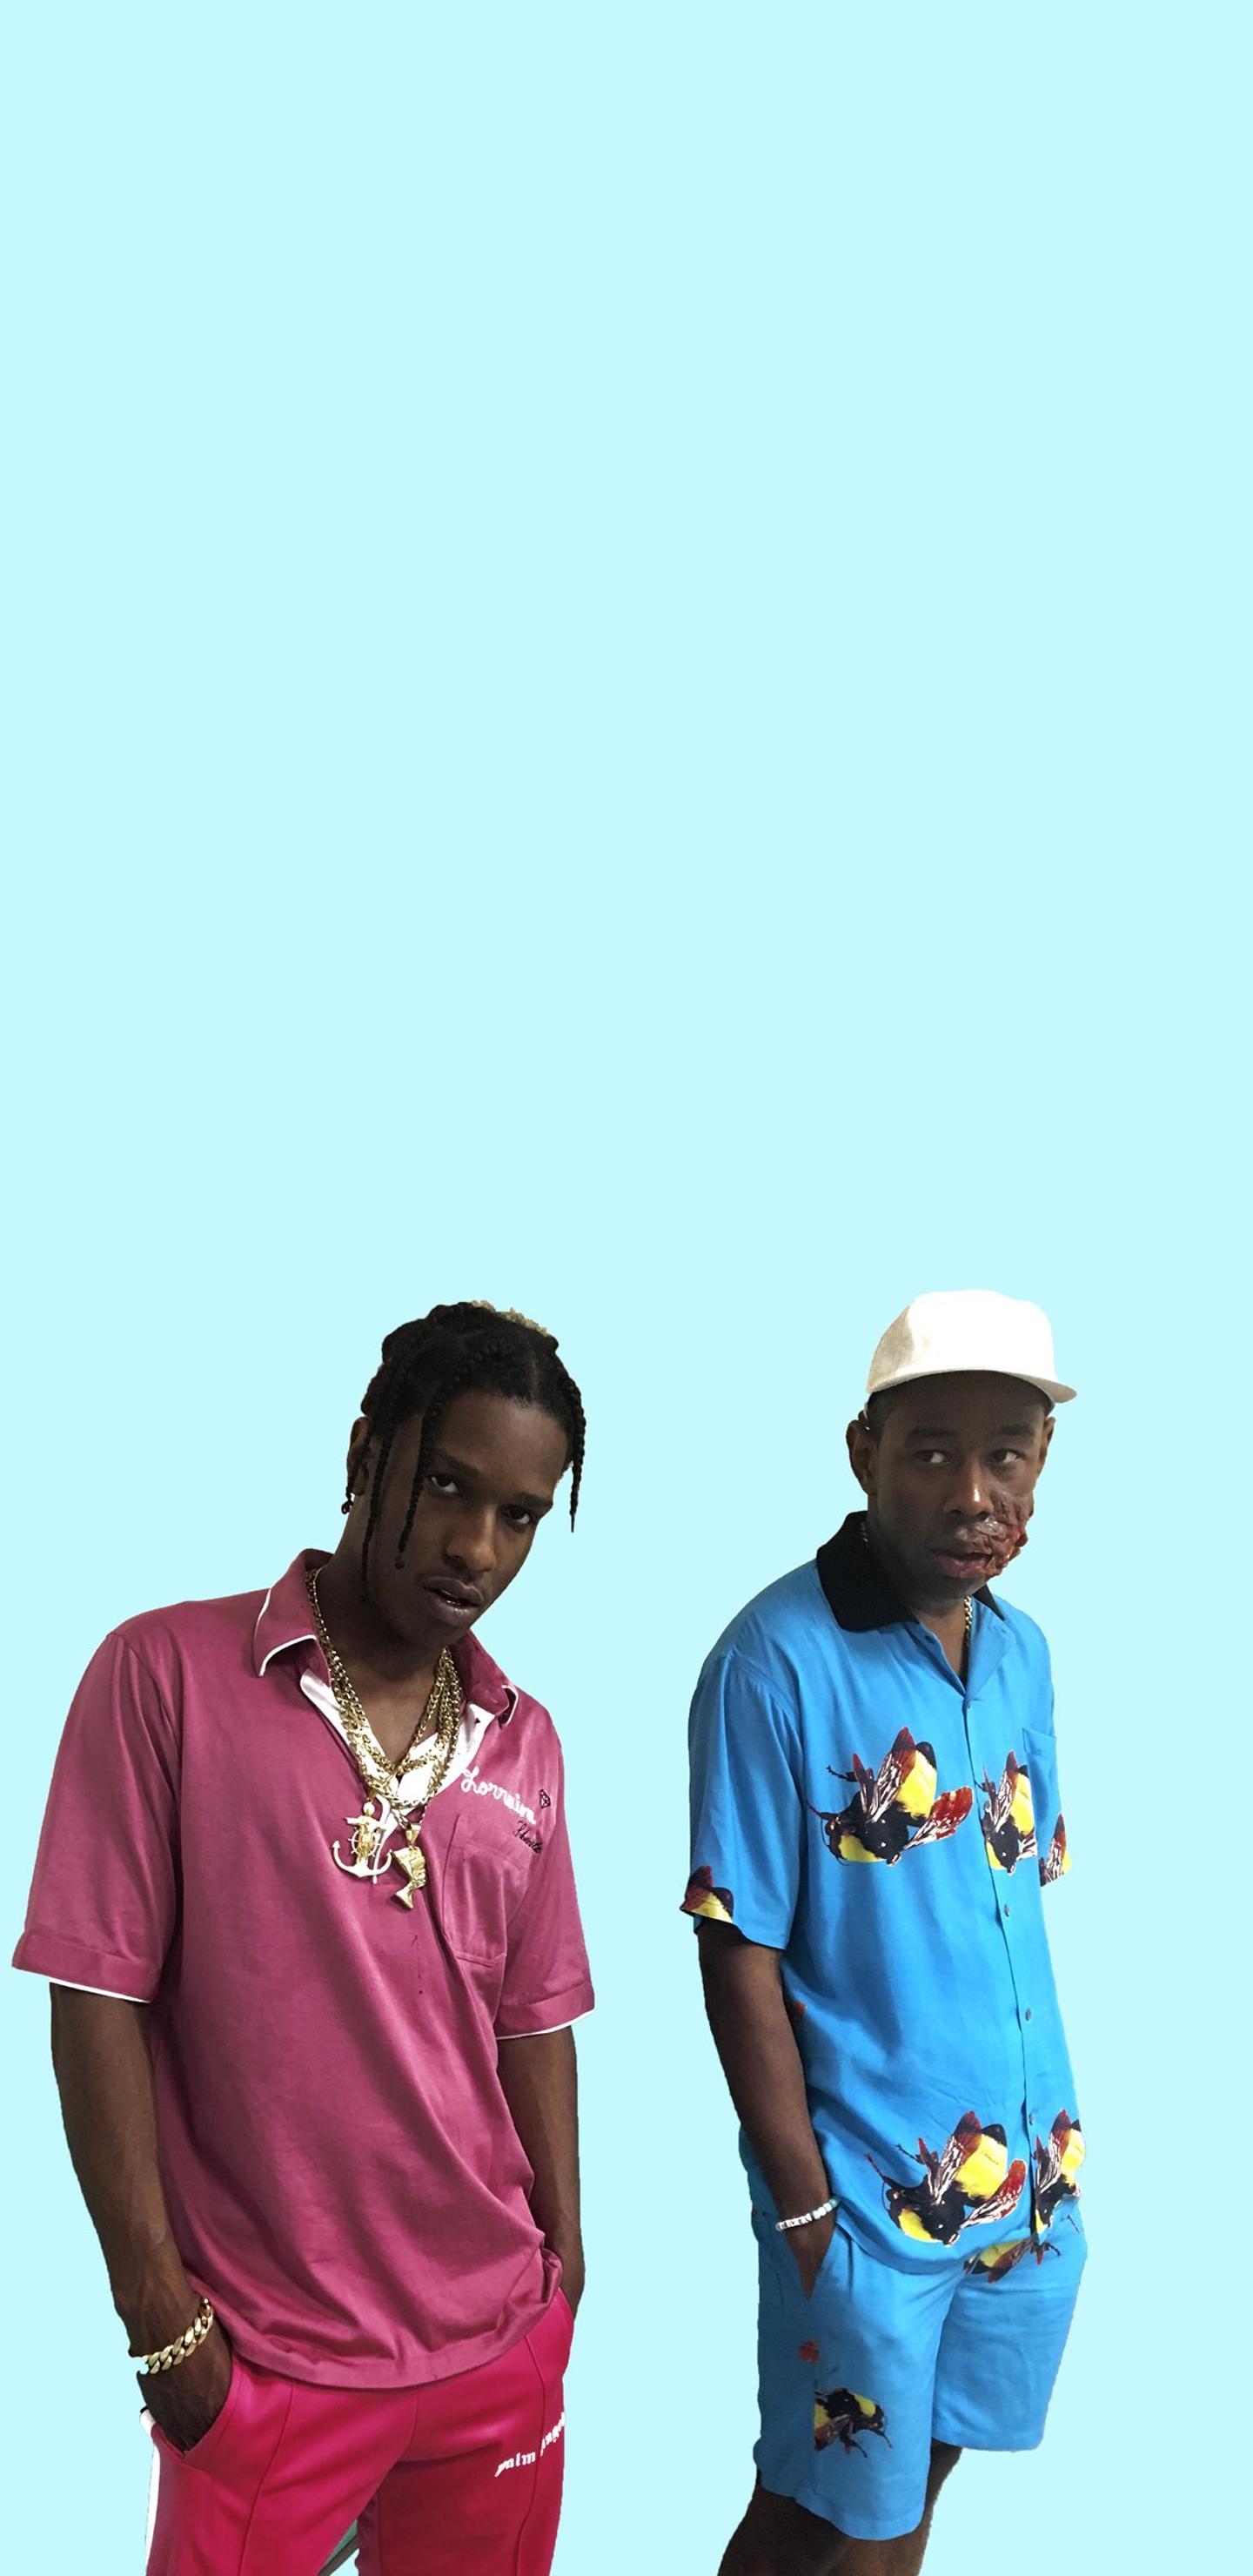 Made Some Wallpaper Inspired By Tyler For Iphone Galaxy S- Album